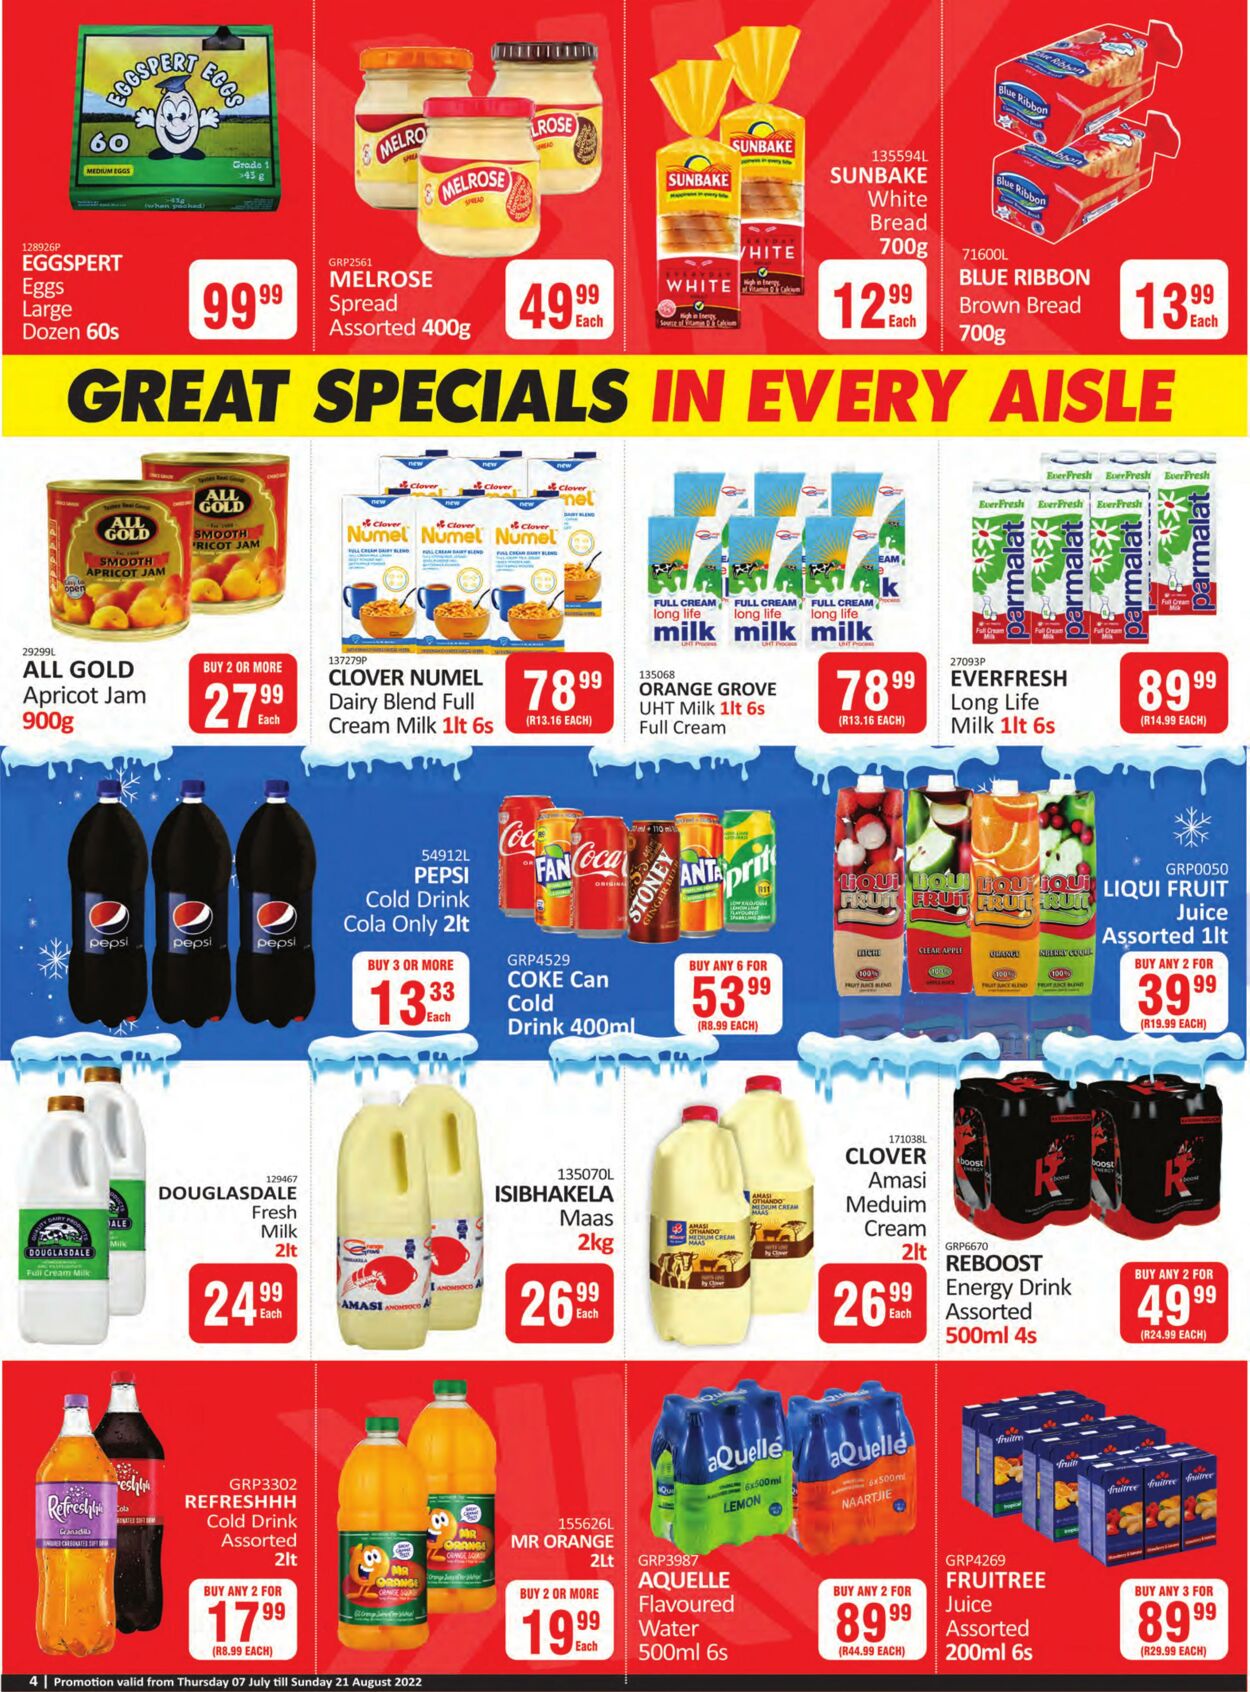 Special Kit Kat Cash and Carry 07.07.2022 - 21.08.2022